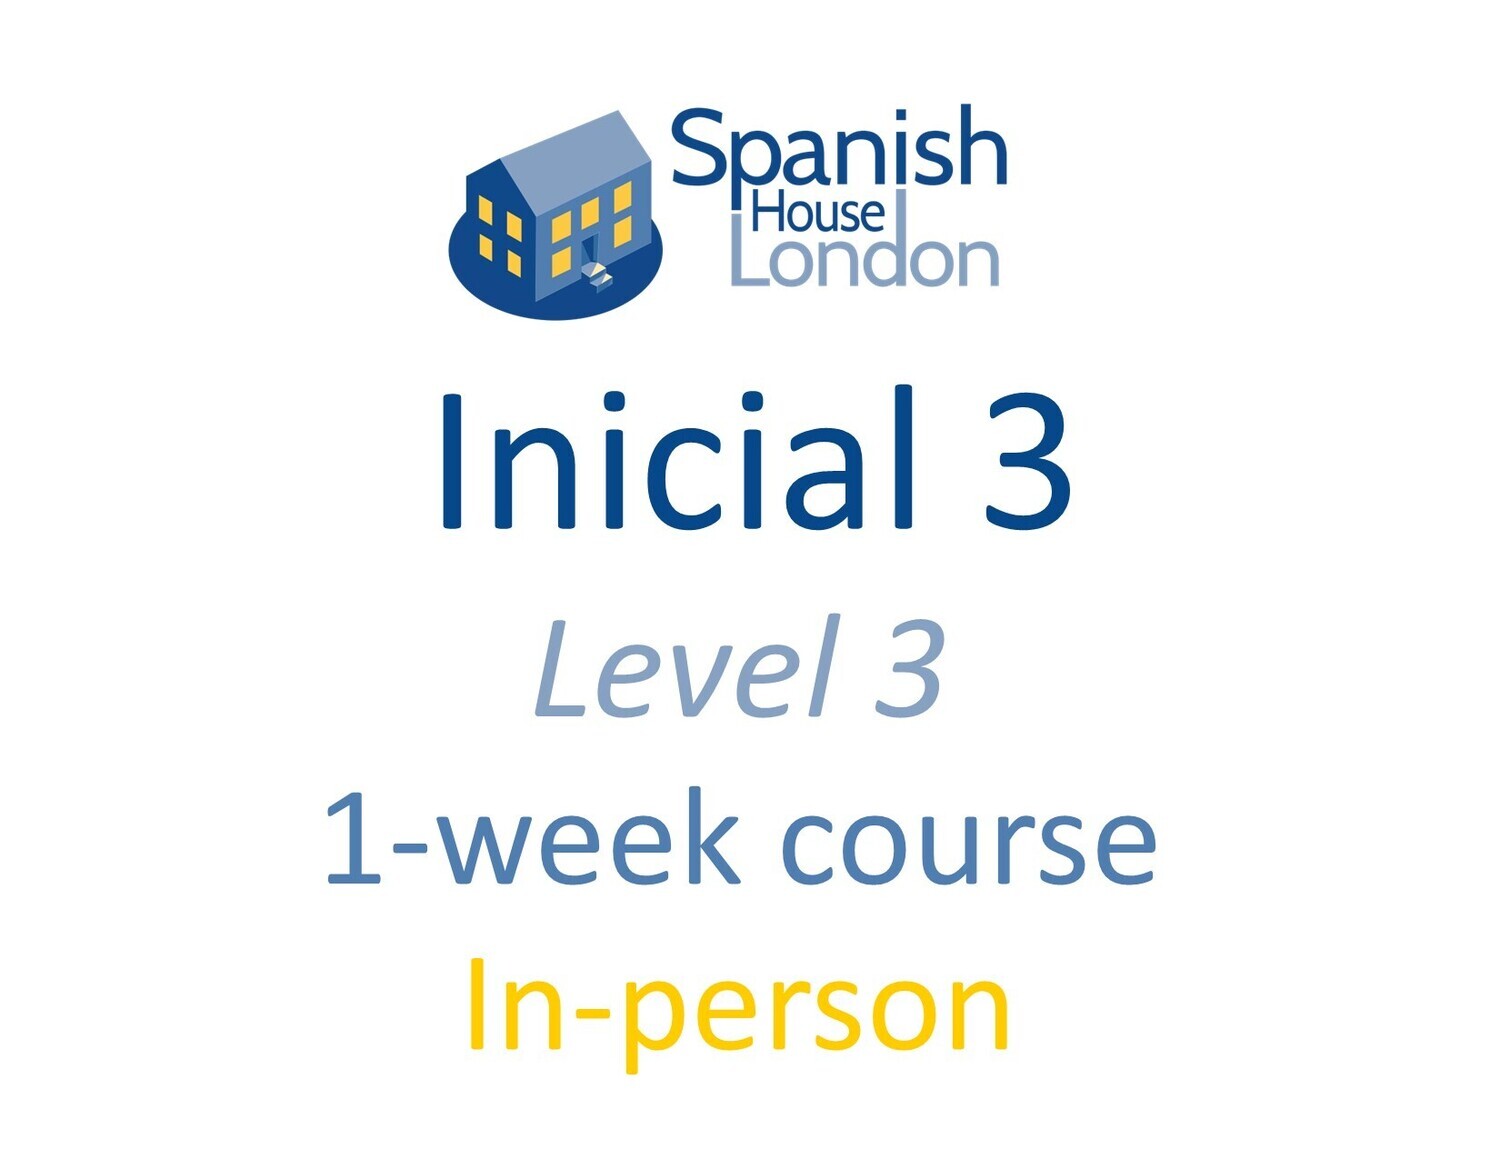 One-Week Intensive Inicial 3 Course starting on 23rd January at 10.30am in Clapham North